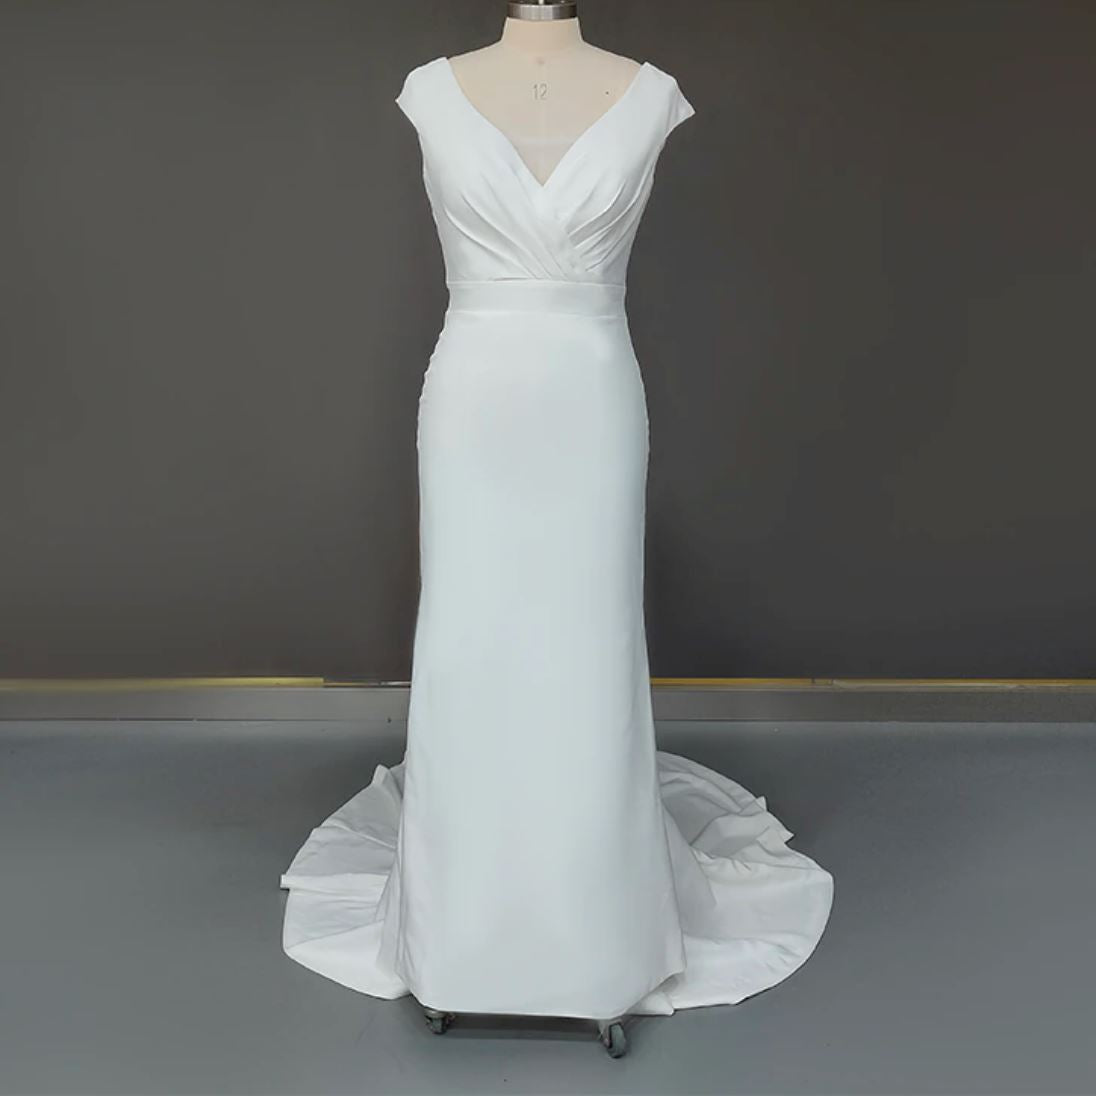 Cap Sleeves Sweep Train Backless Pleated High Slit Wedding Bridal Gown Sexy Wedding Dresses BlissGown 